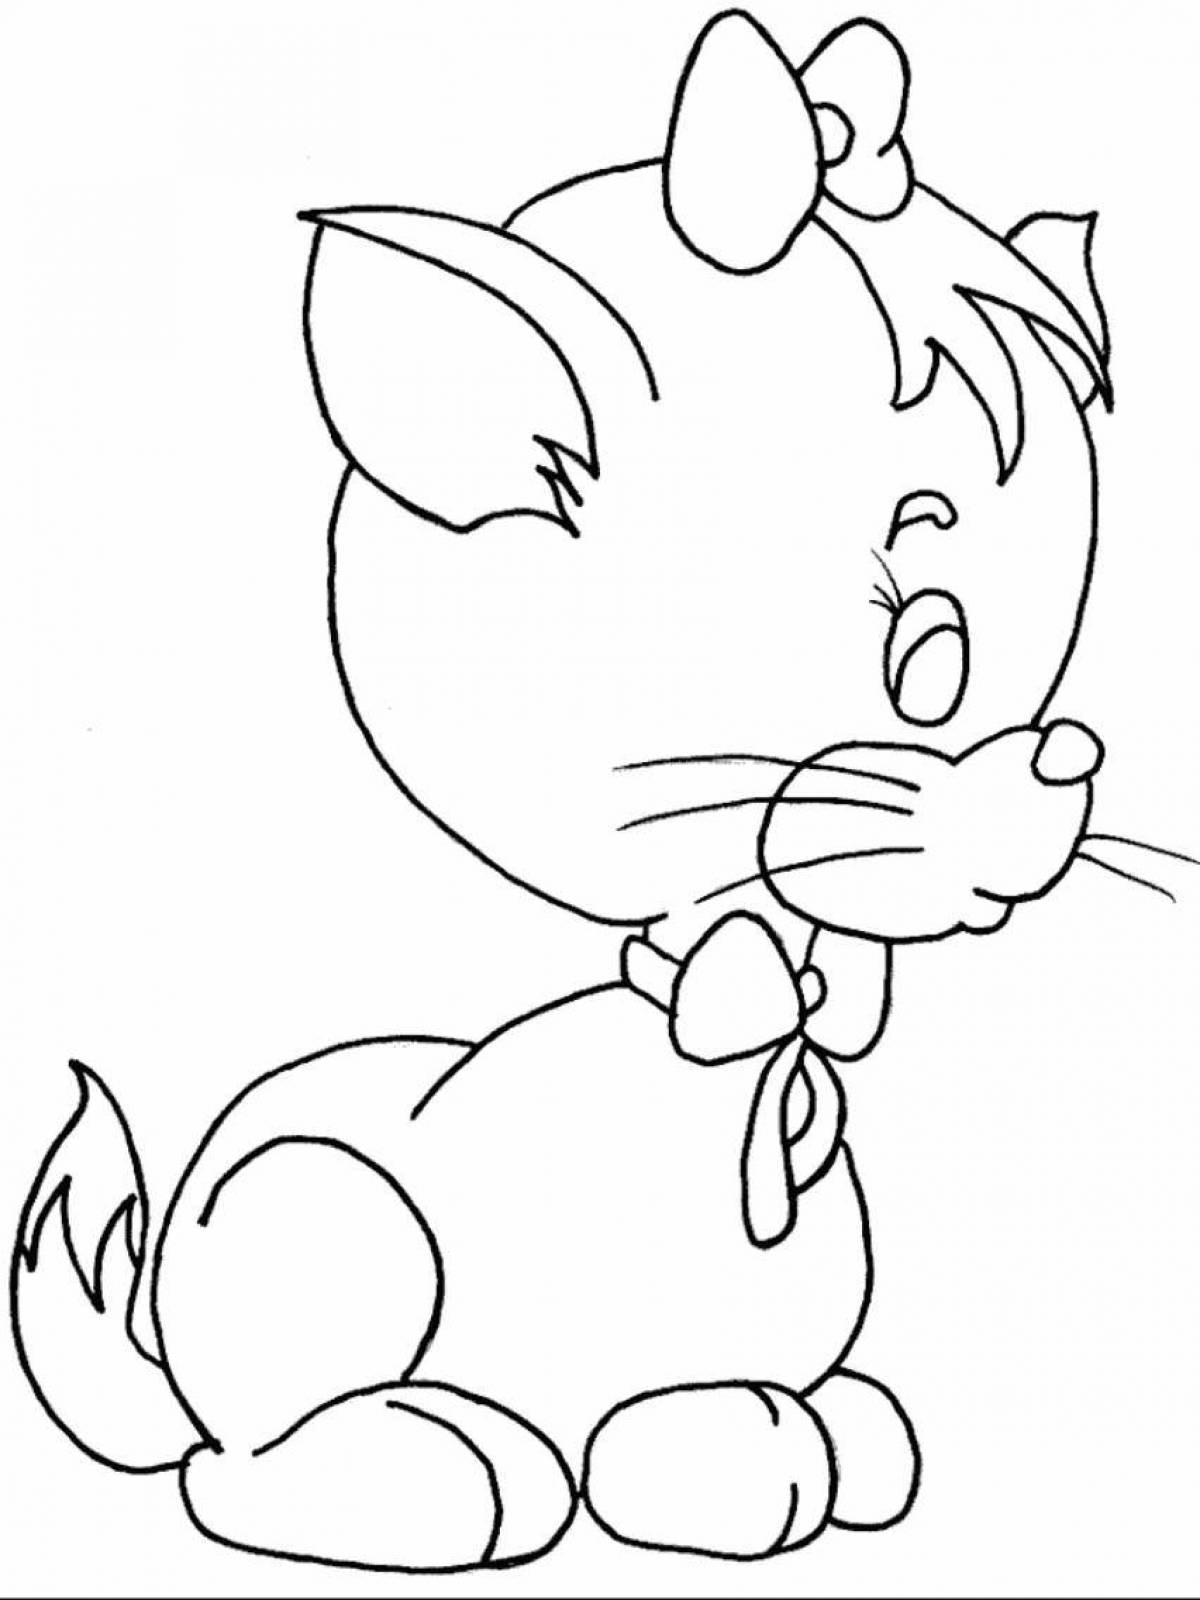 Animated cat coloring page for 2-3 year olds